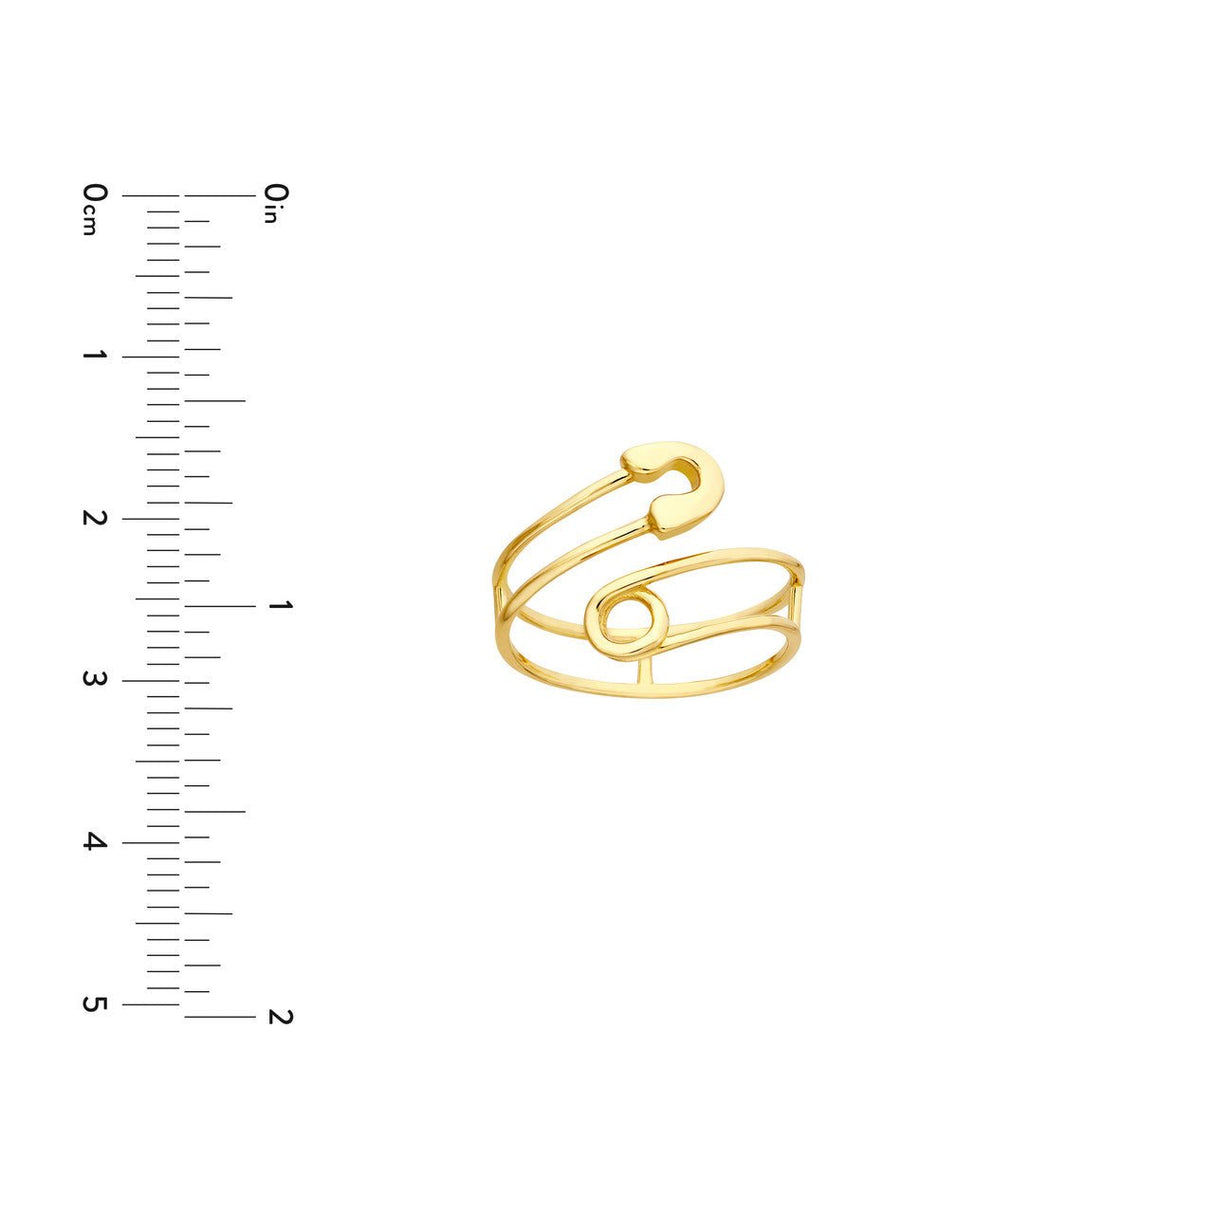 The Bypass Ring with its safety pin design displayed against a minimalist background, emphasizing its innovative style and the sophistication of the 14K gold